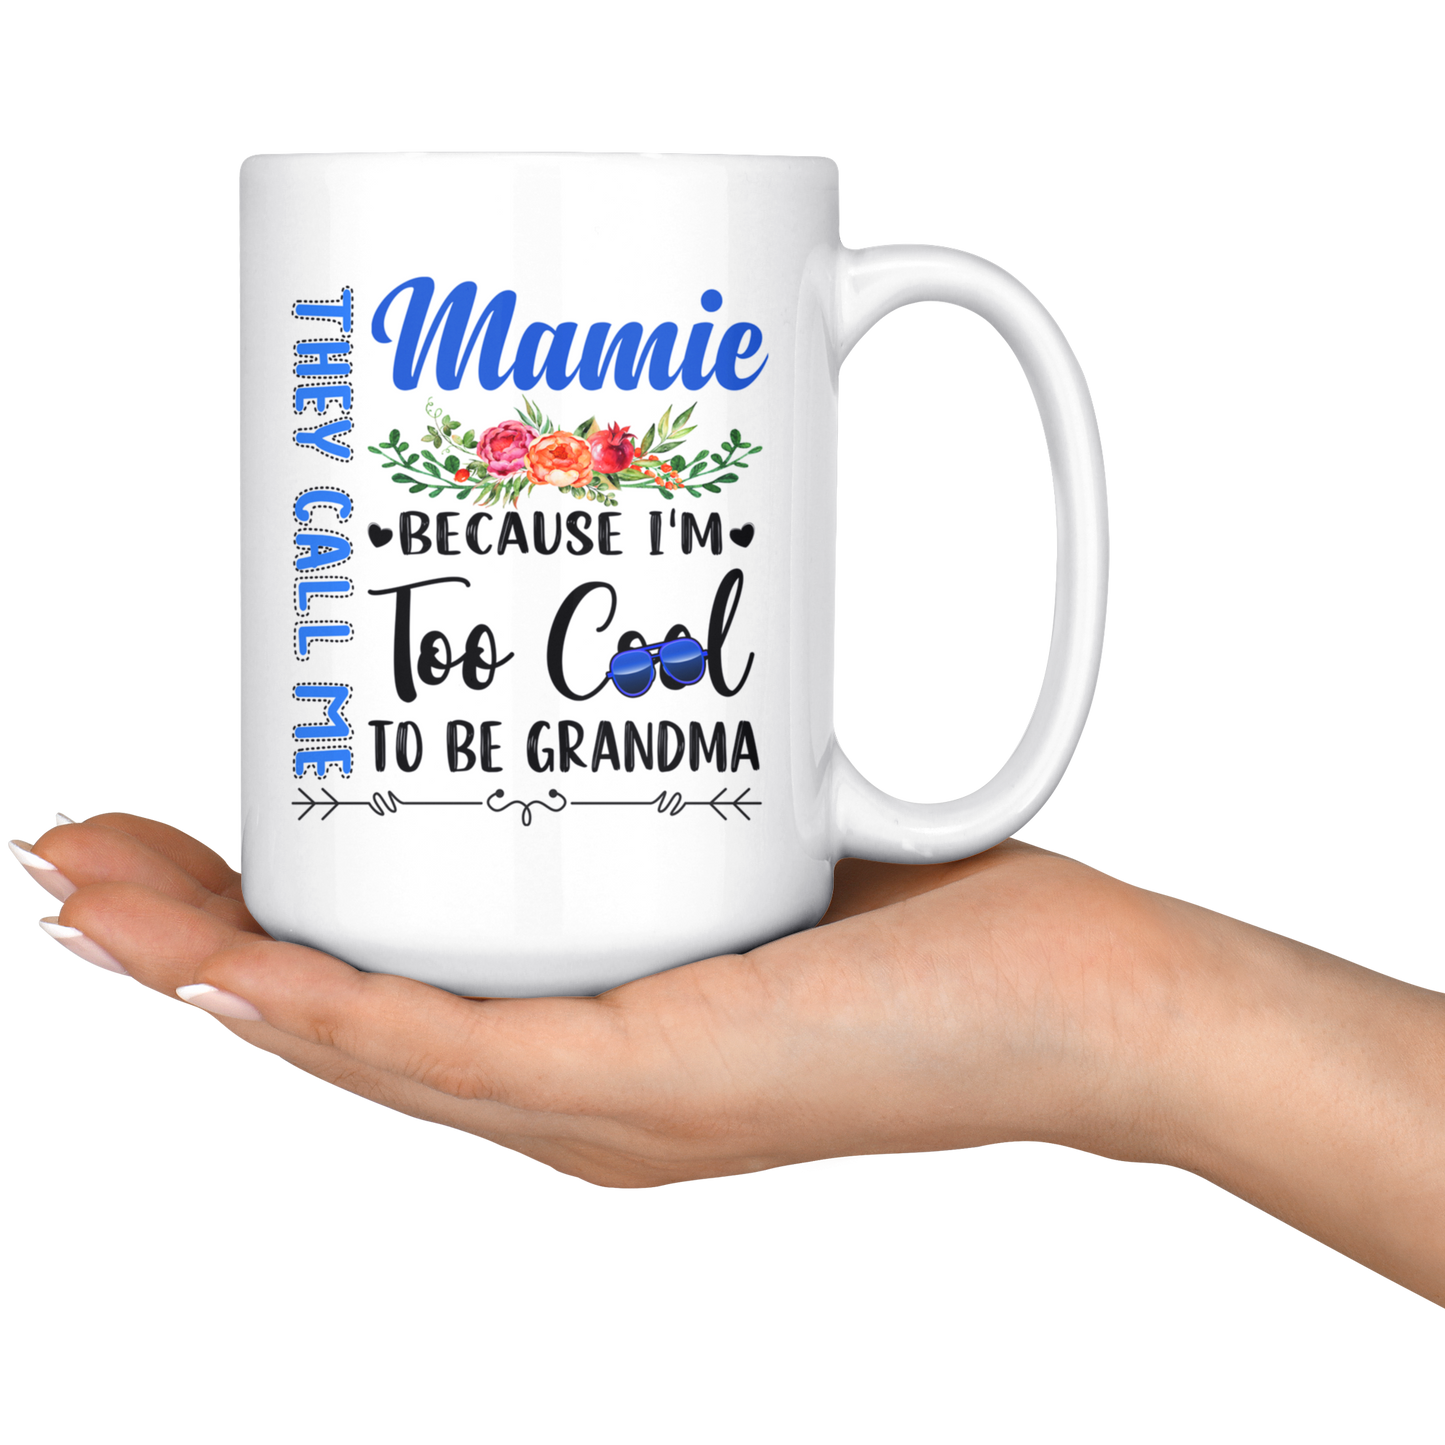 MUG01220795812-sp-23085 - Best Idea Gift In Mothers Day They Call Me Mamie Because I